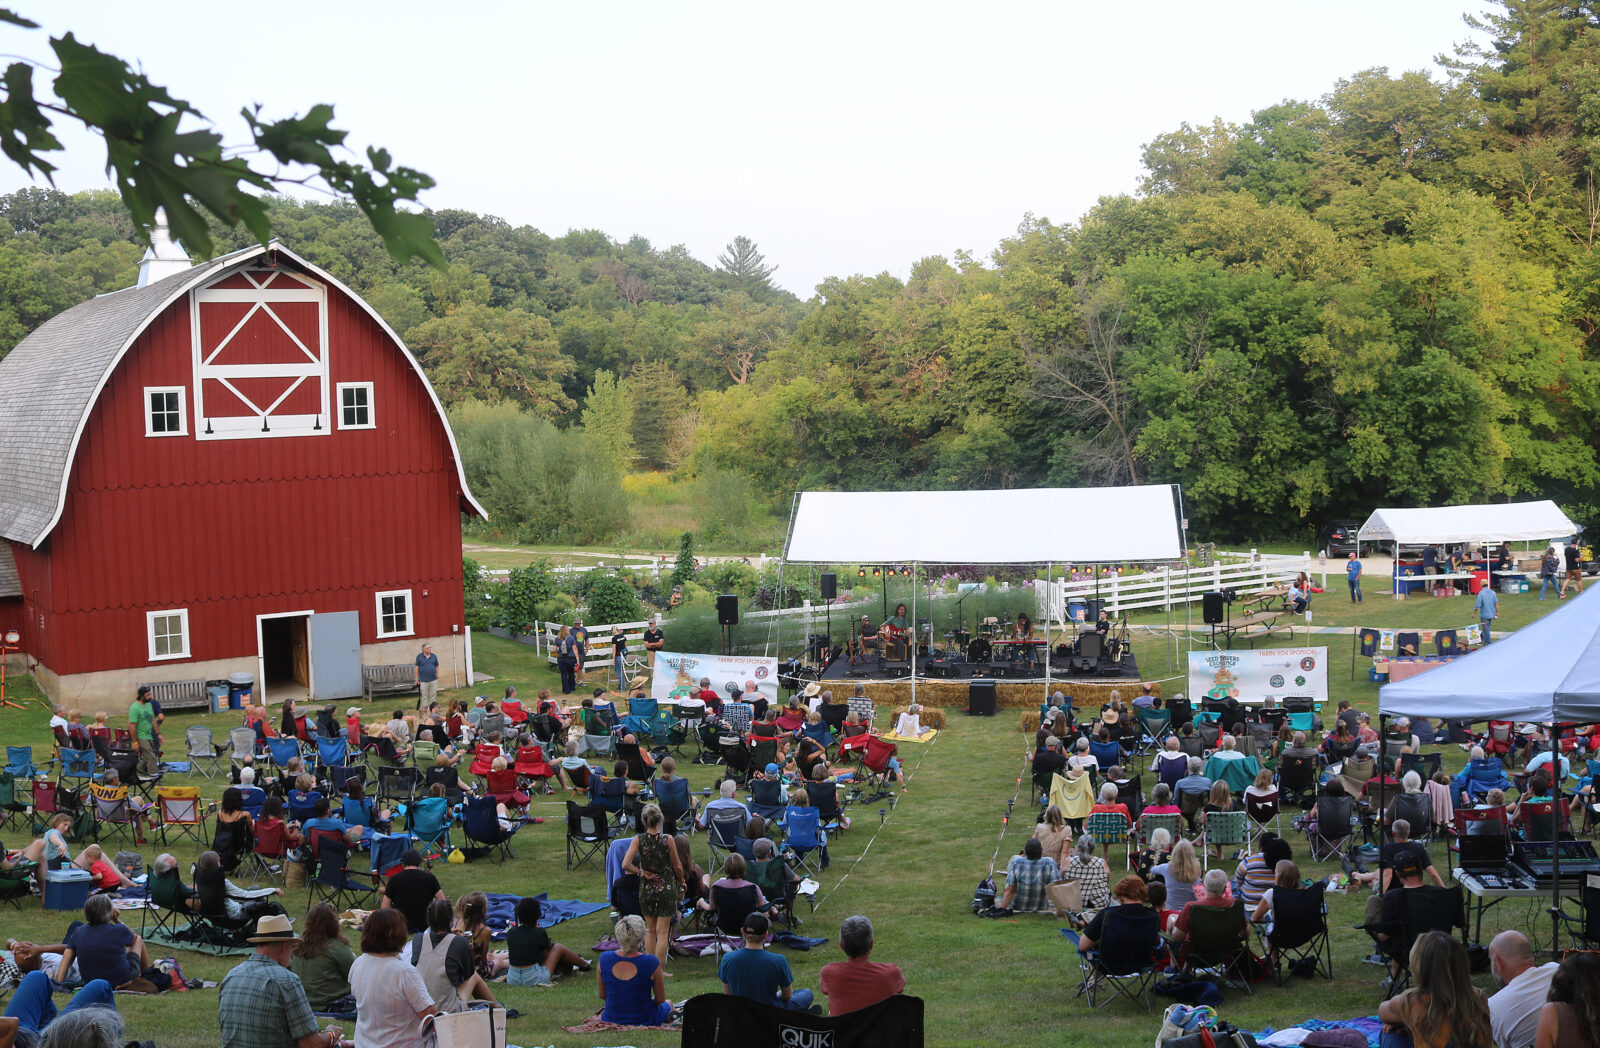 A crowd gathered on a lawn in front of a stage and red barn.